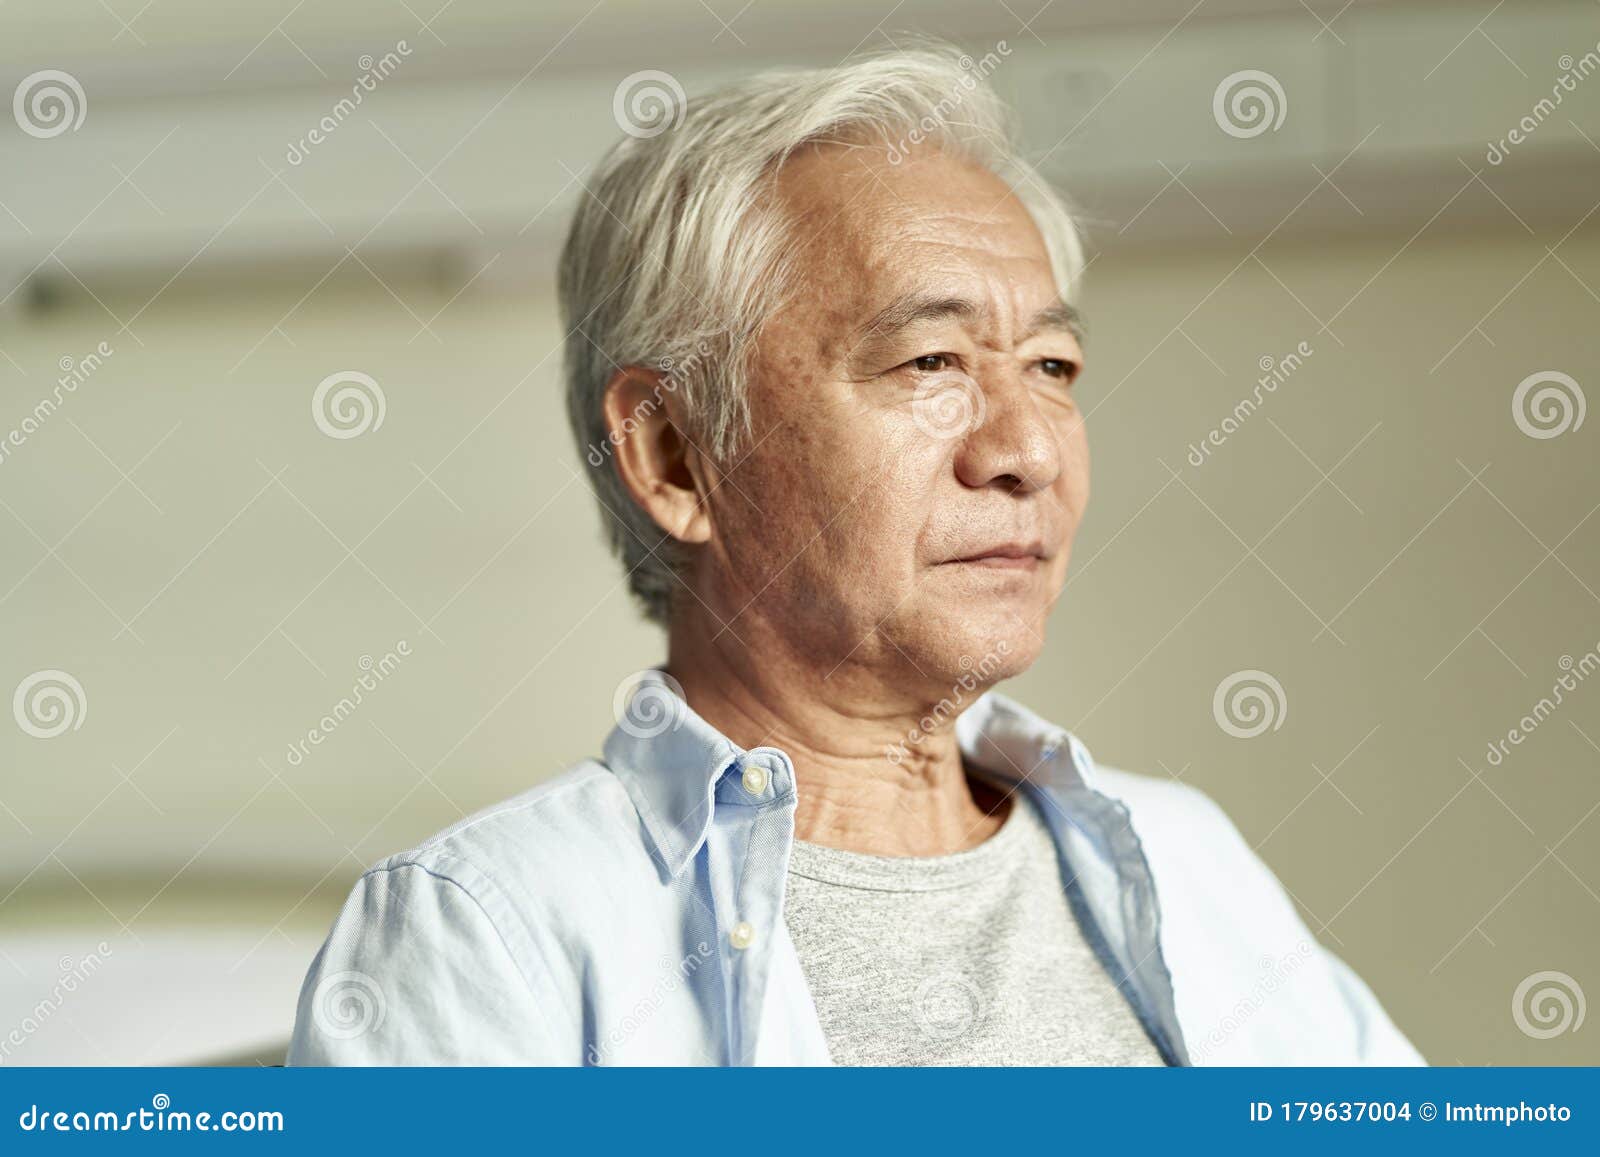 5. Asian man with blonde highlights - wide 7